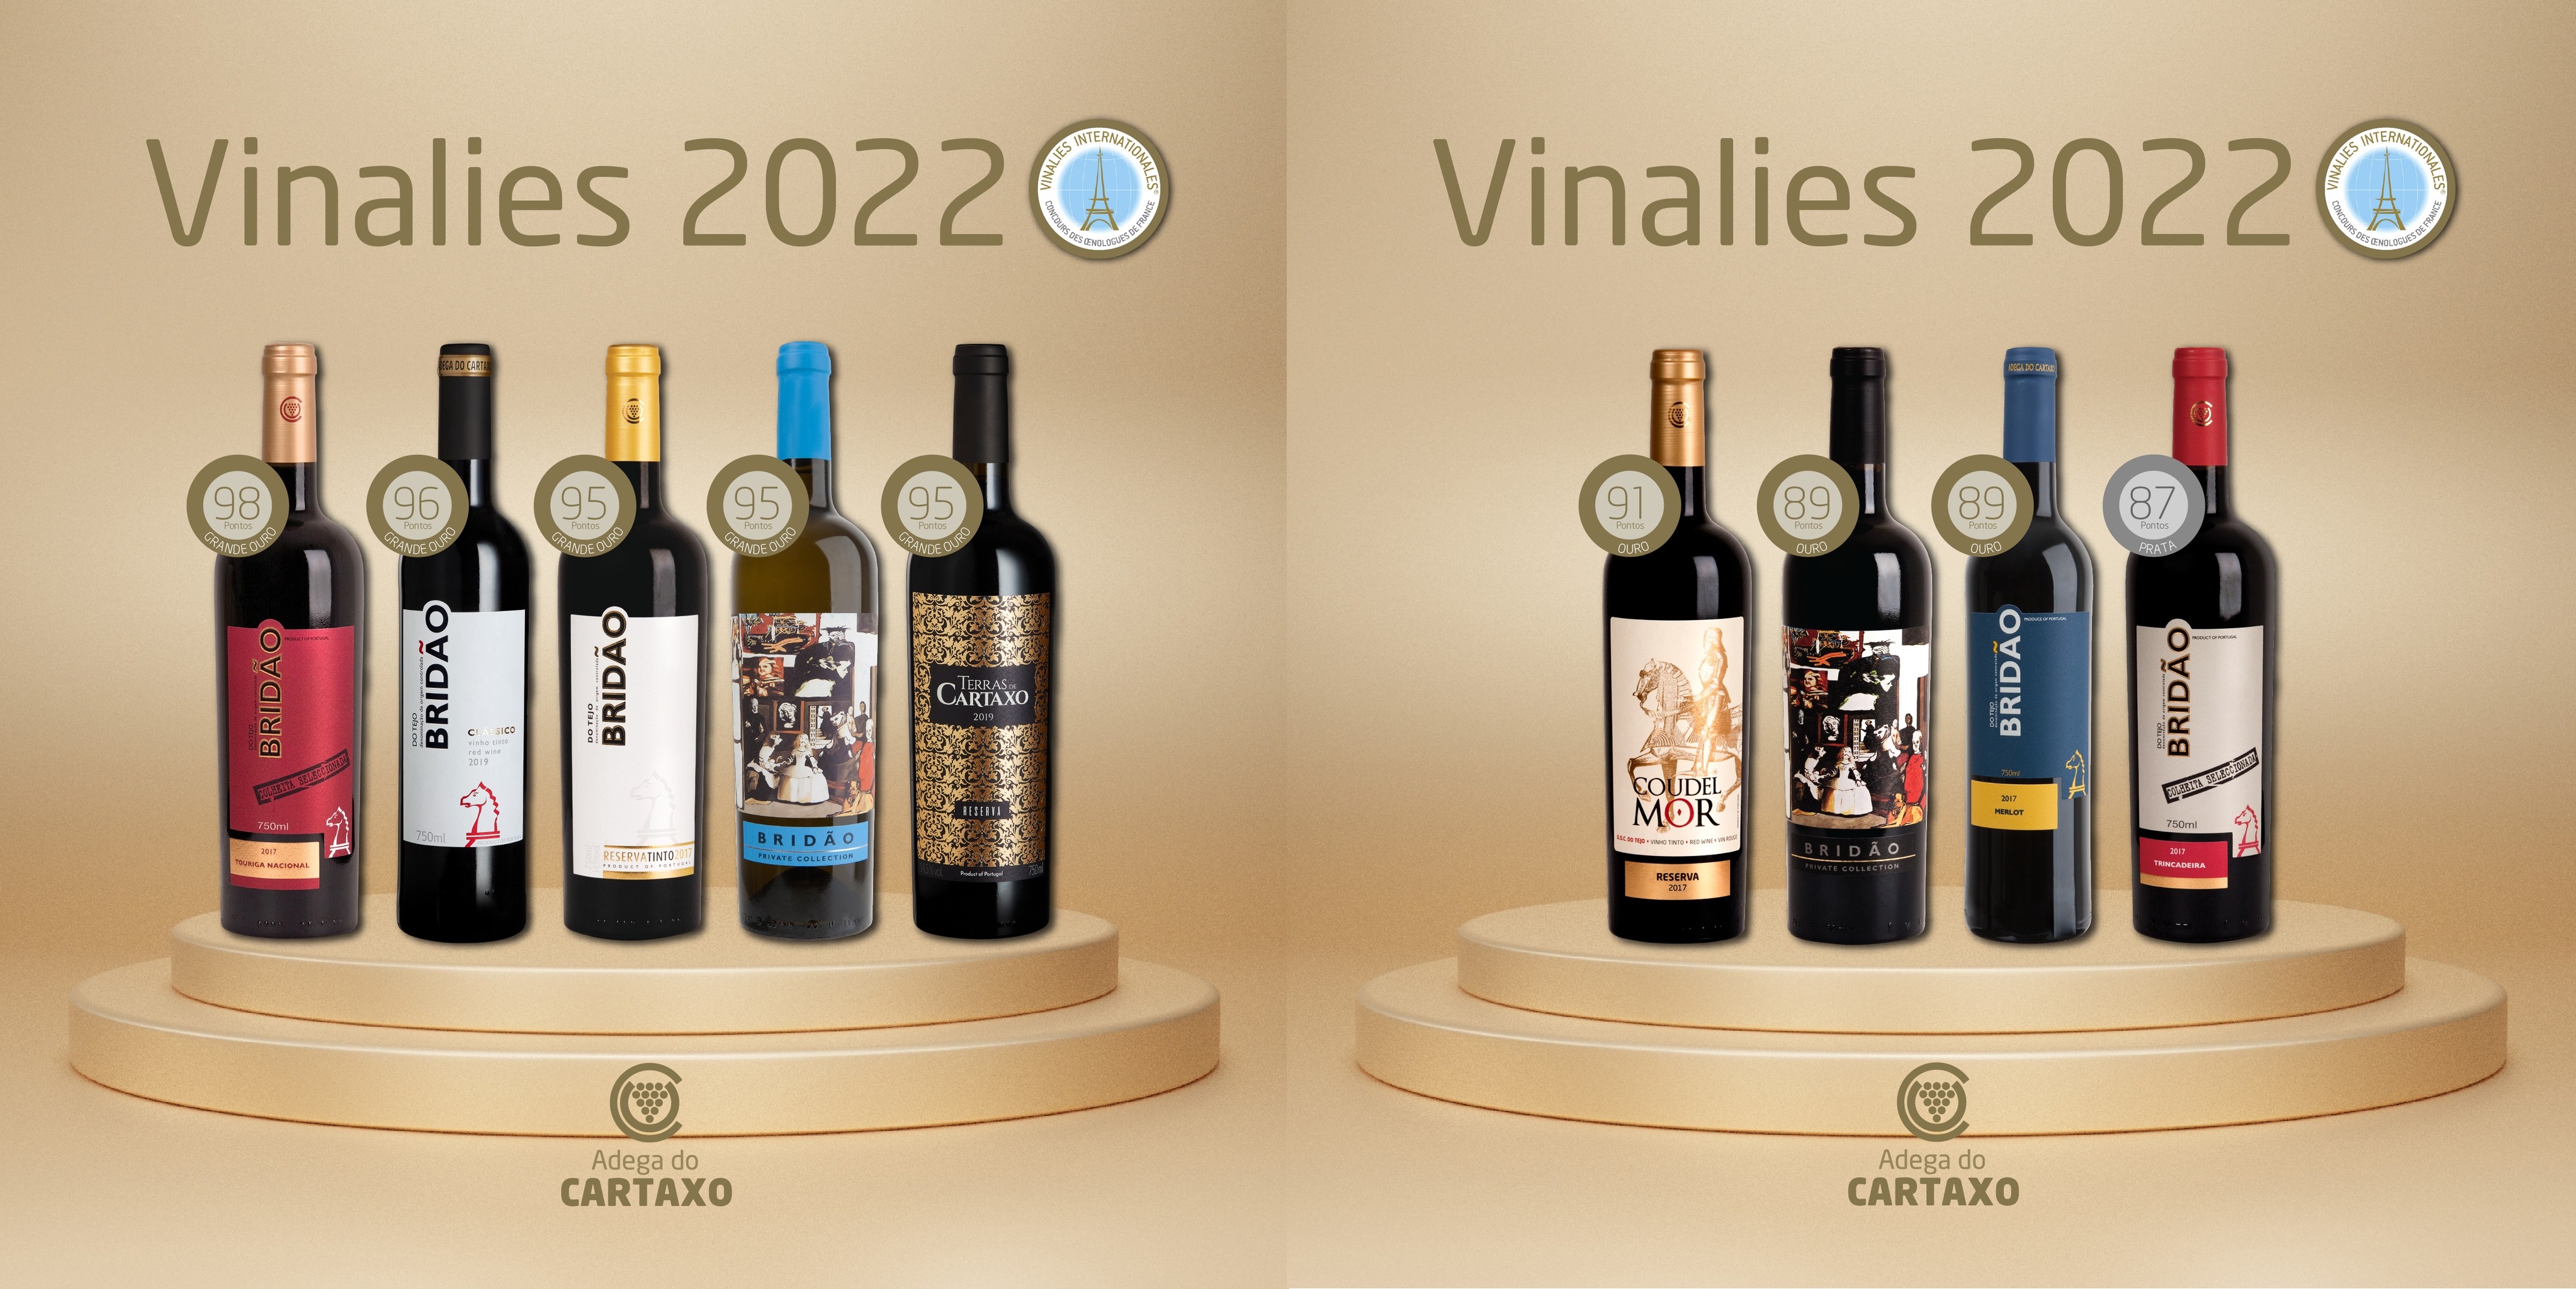 The 2022 Vinalies Internationales Competition awarded 9 wines from our Winery